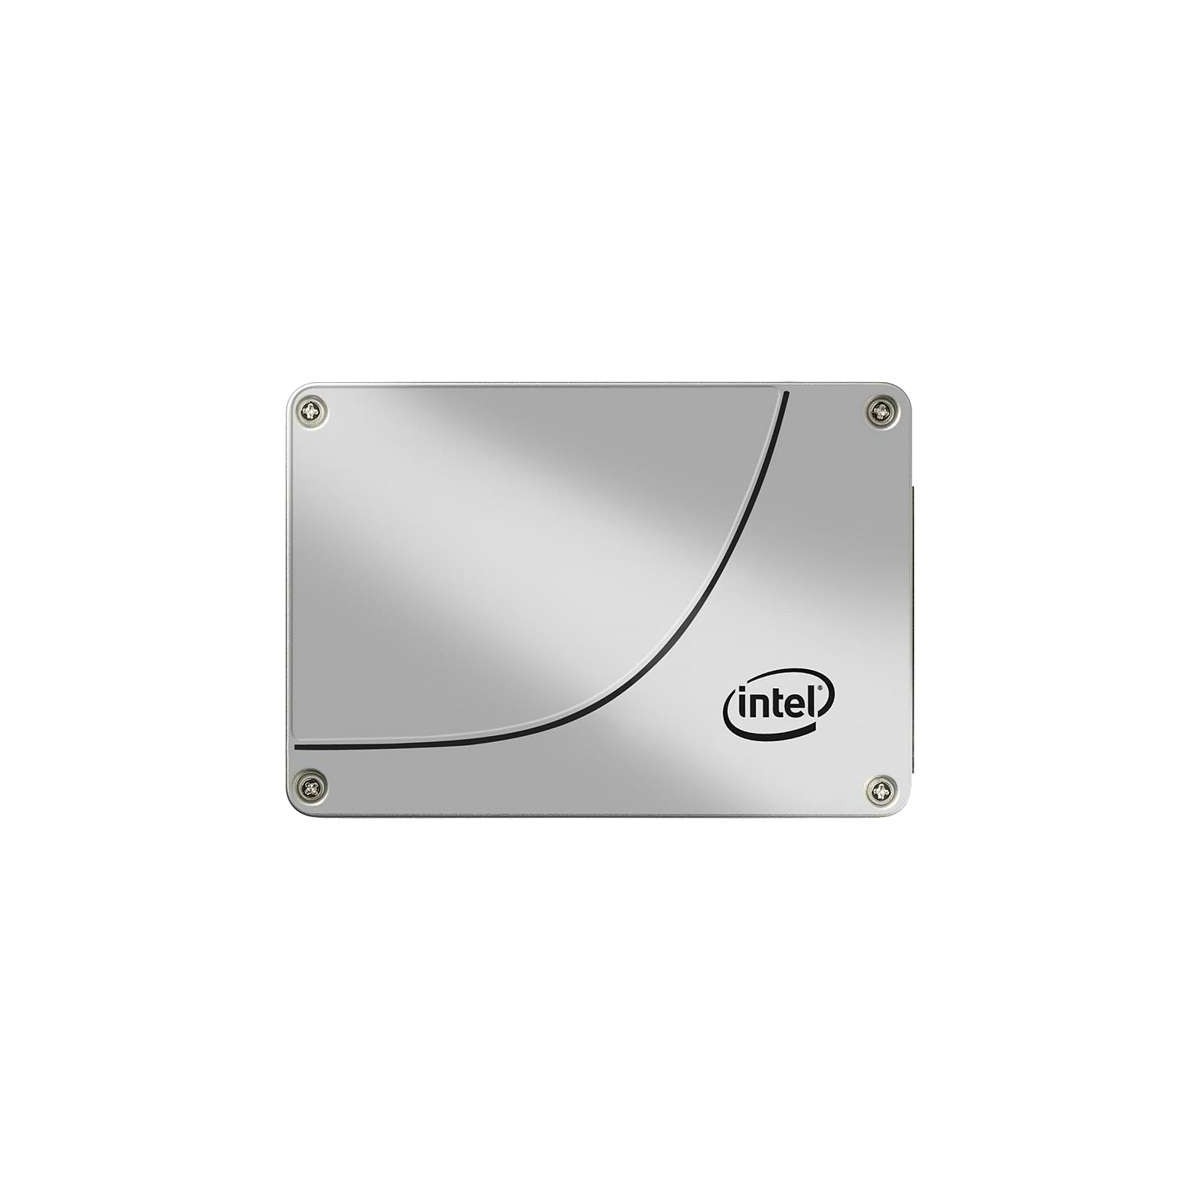 Intel Solid-State Drive DC S3610 Series 2.5 SATA 200 GB - Solid State Disk - Internal